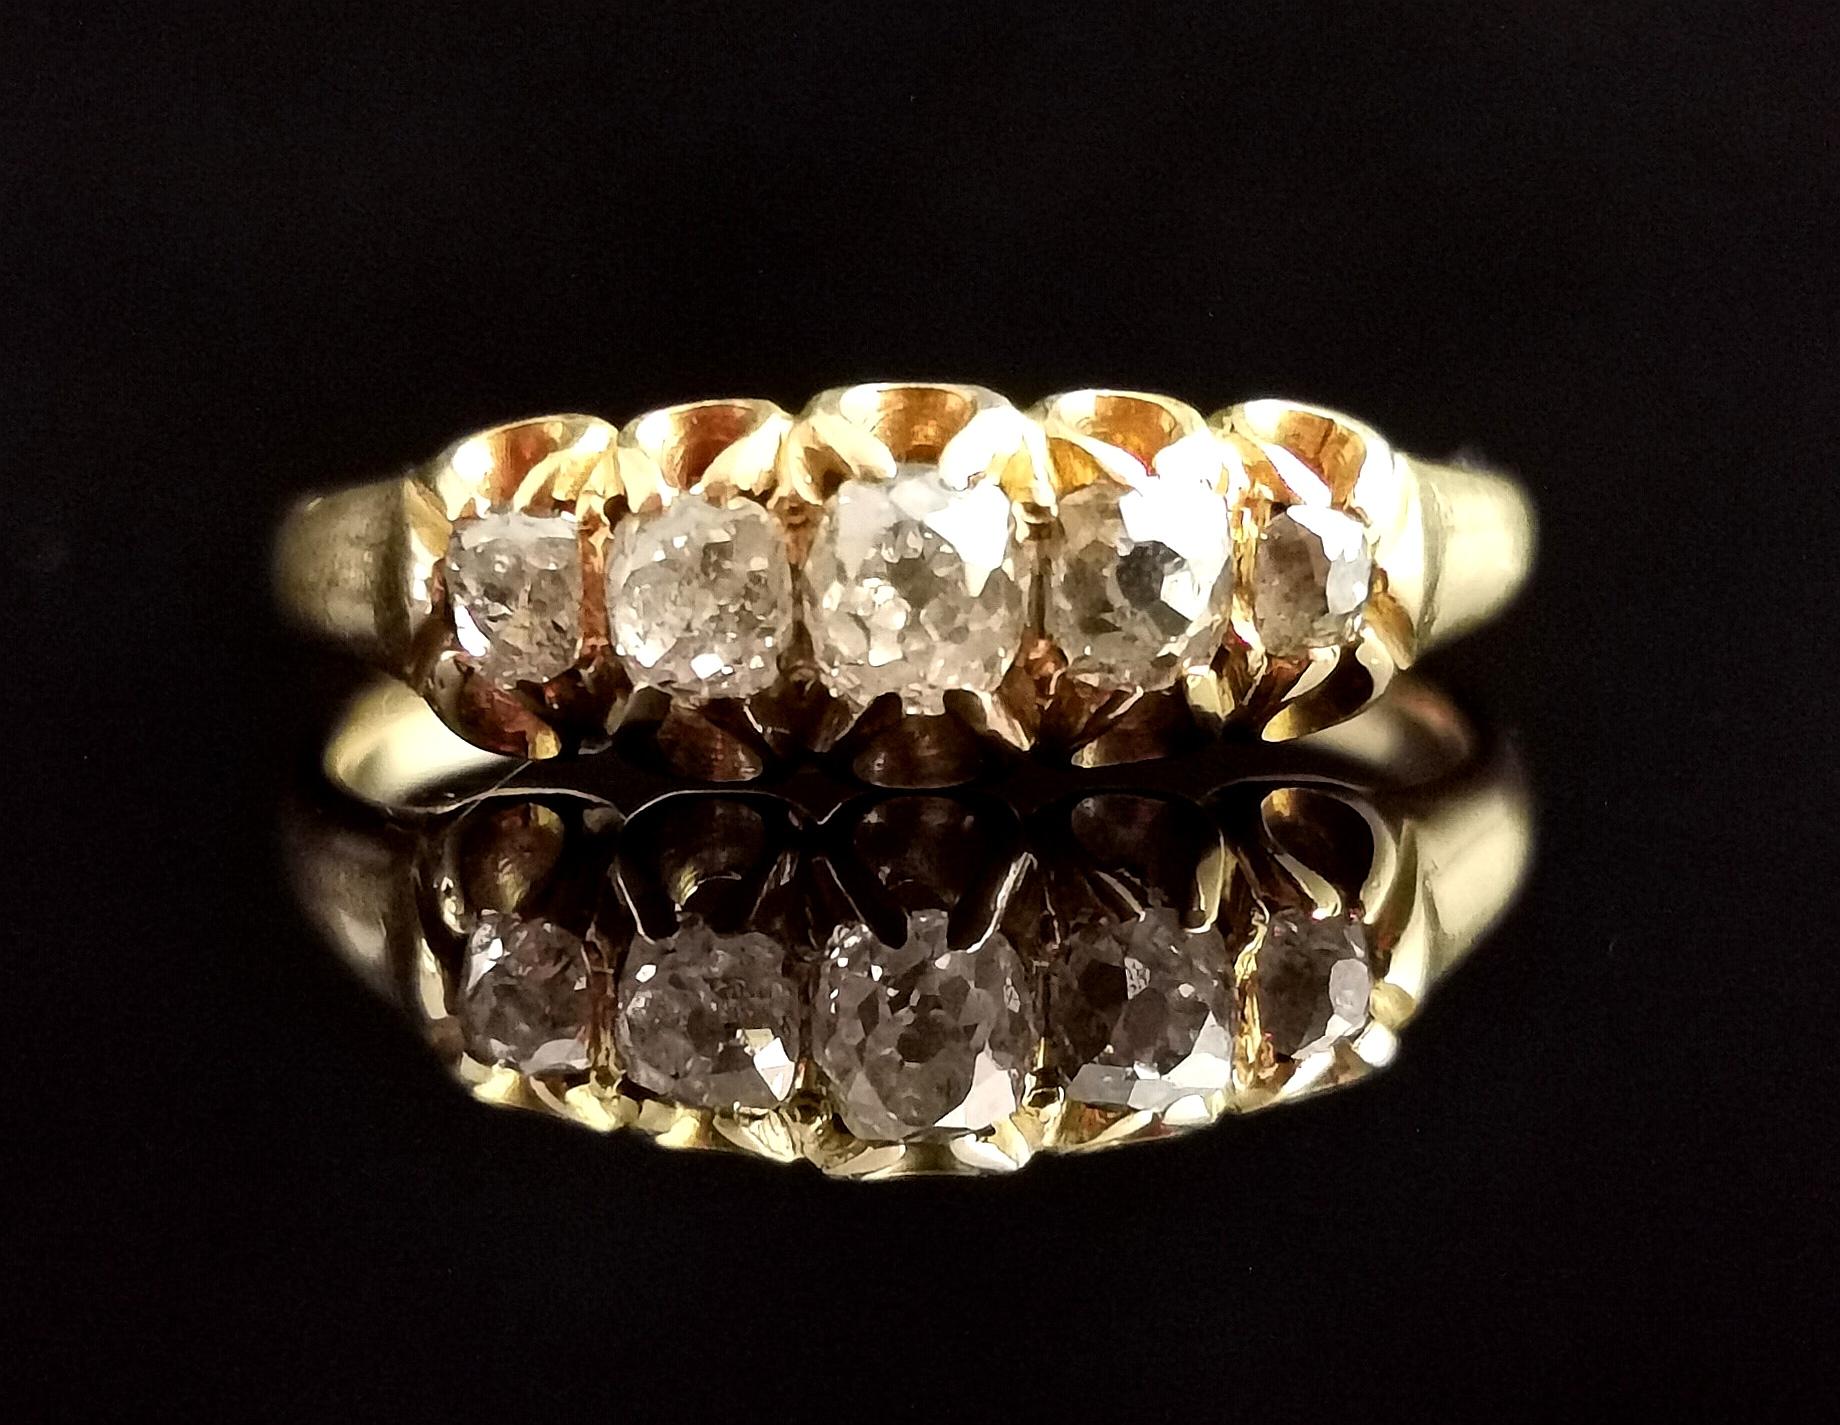 A stunning antique, late Victorian era five stone diamond ring in 18kt yellow gold.

This spectacular beauty features five graduated old cut diamonds, the largest being the centre stone.

The diamonds have an approx 0.45ct total weight and really